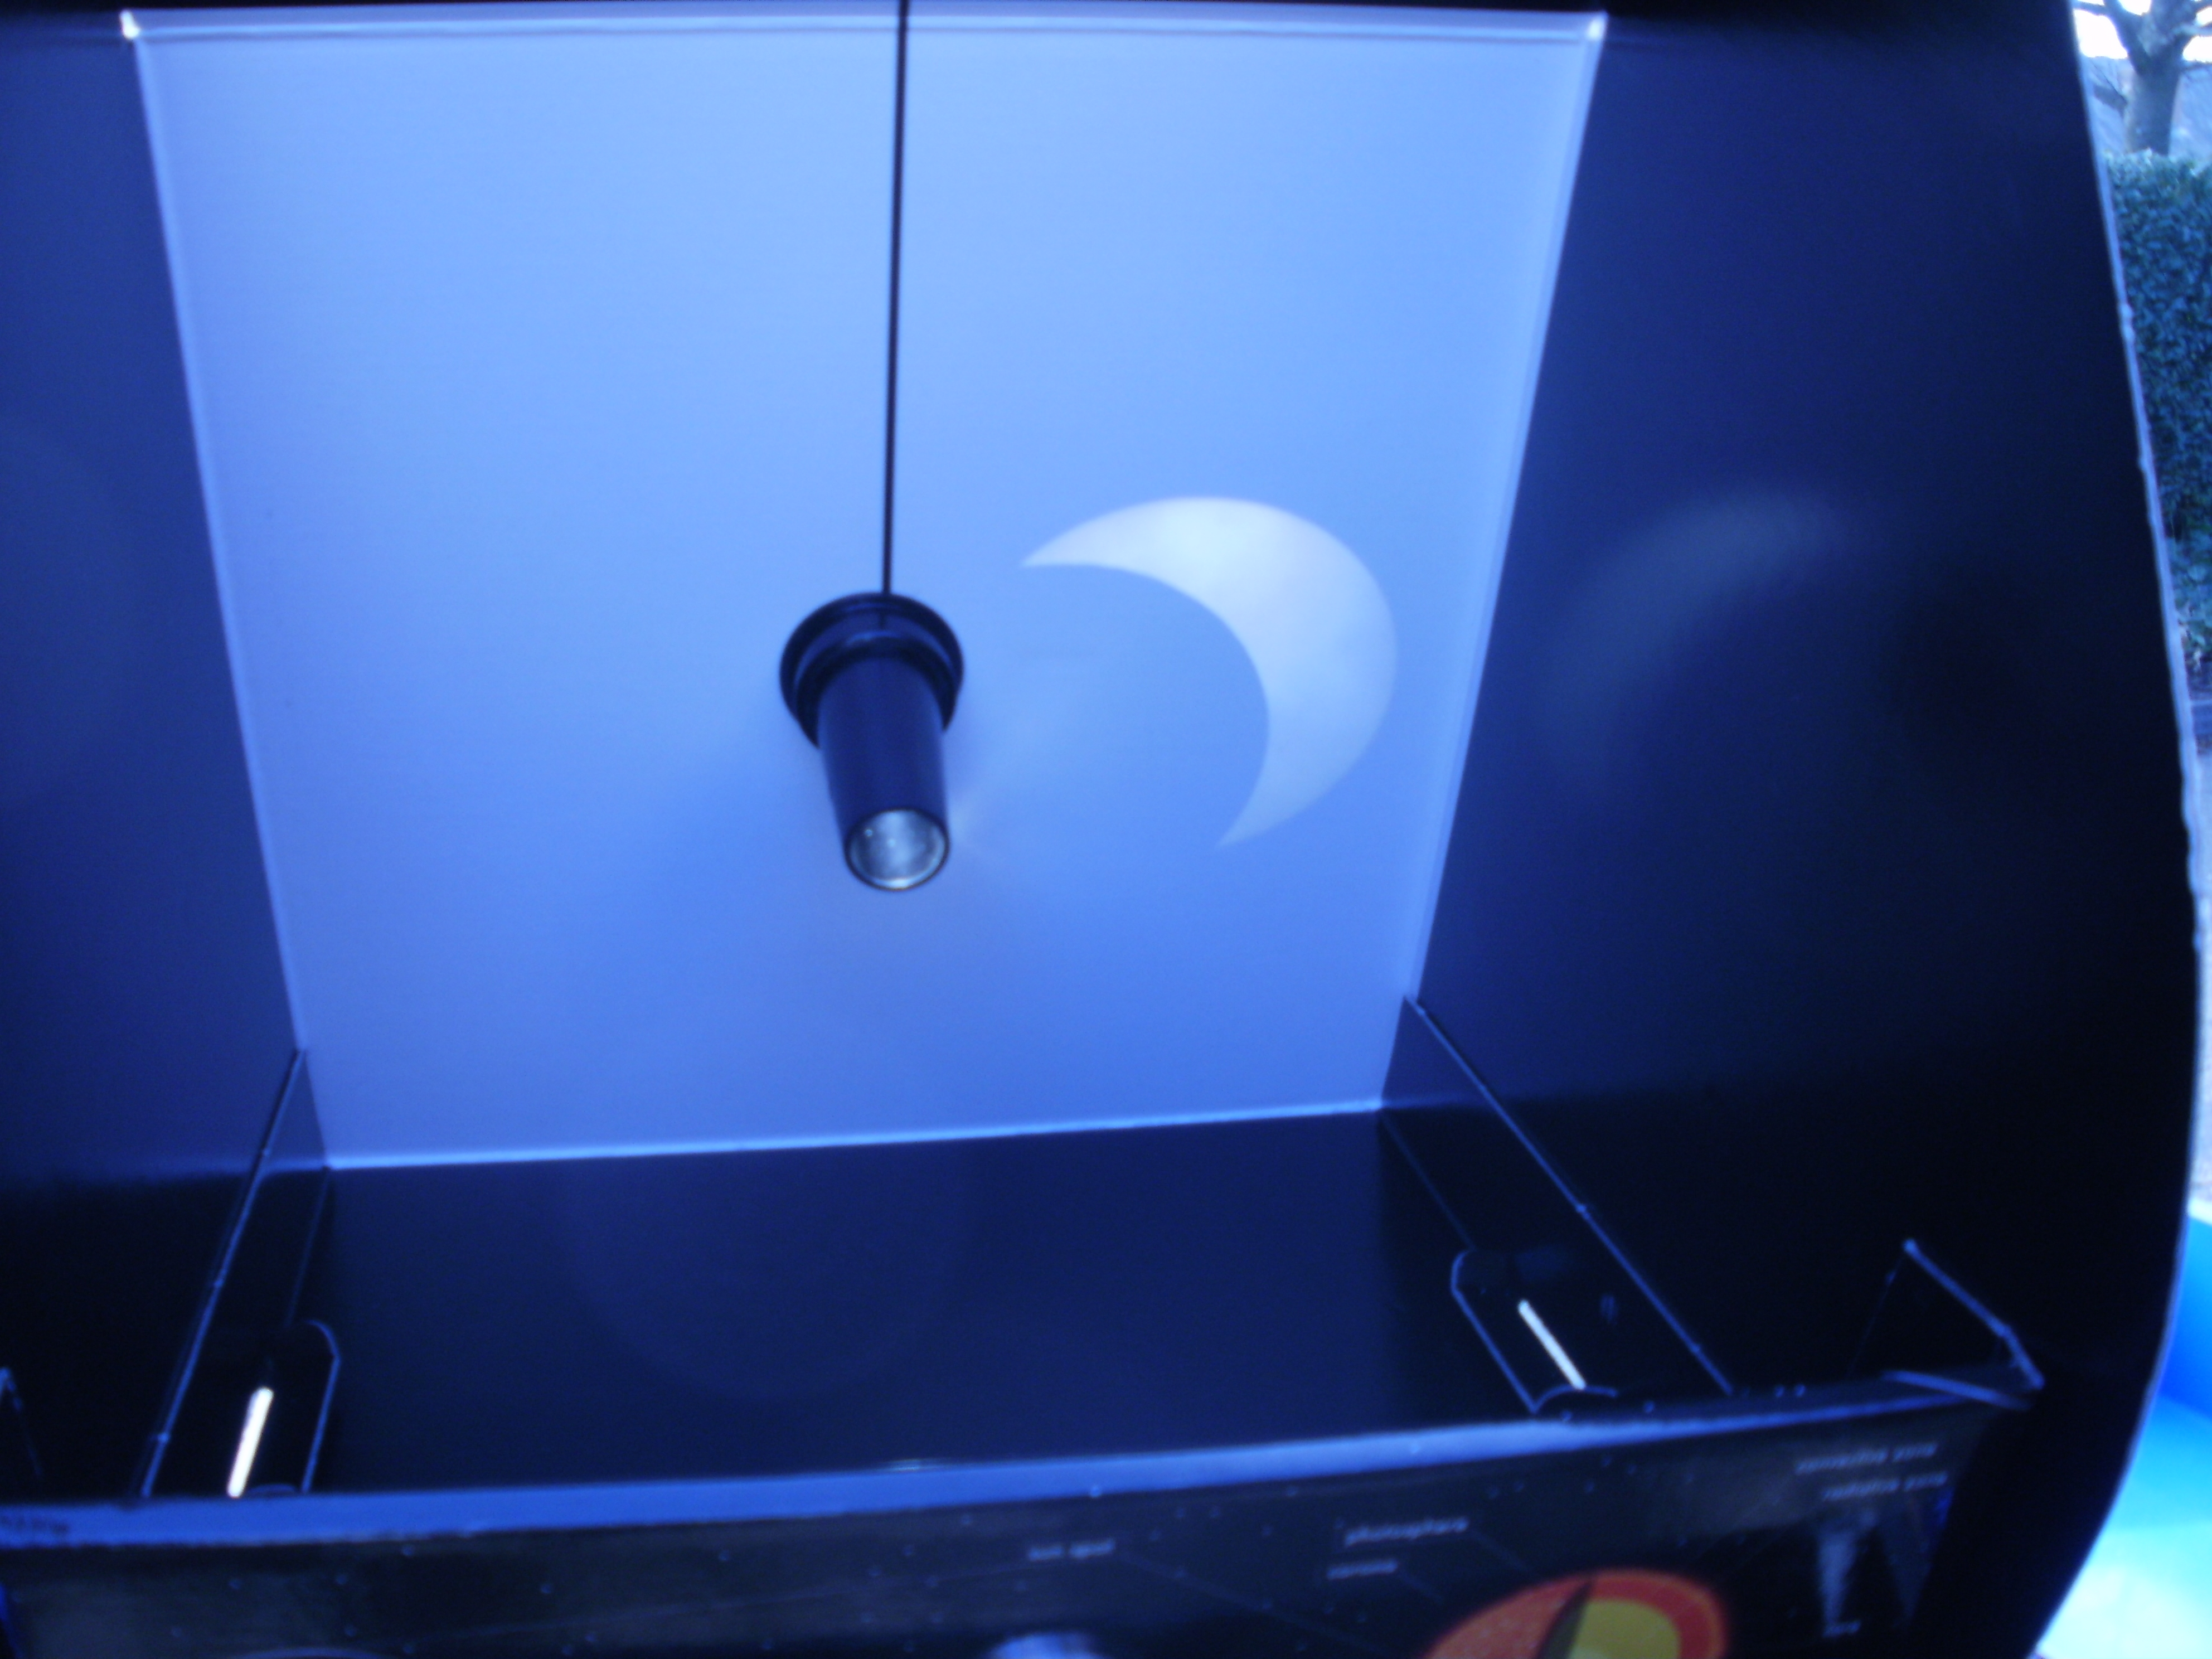 The partial eclipse as seen through the solar scope - taken at 9.12am